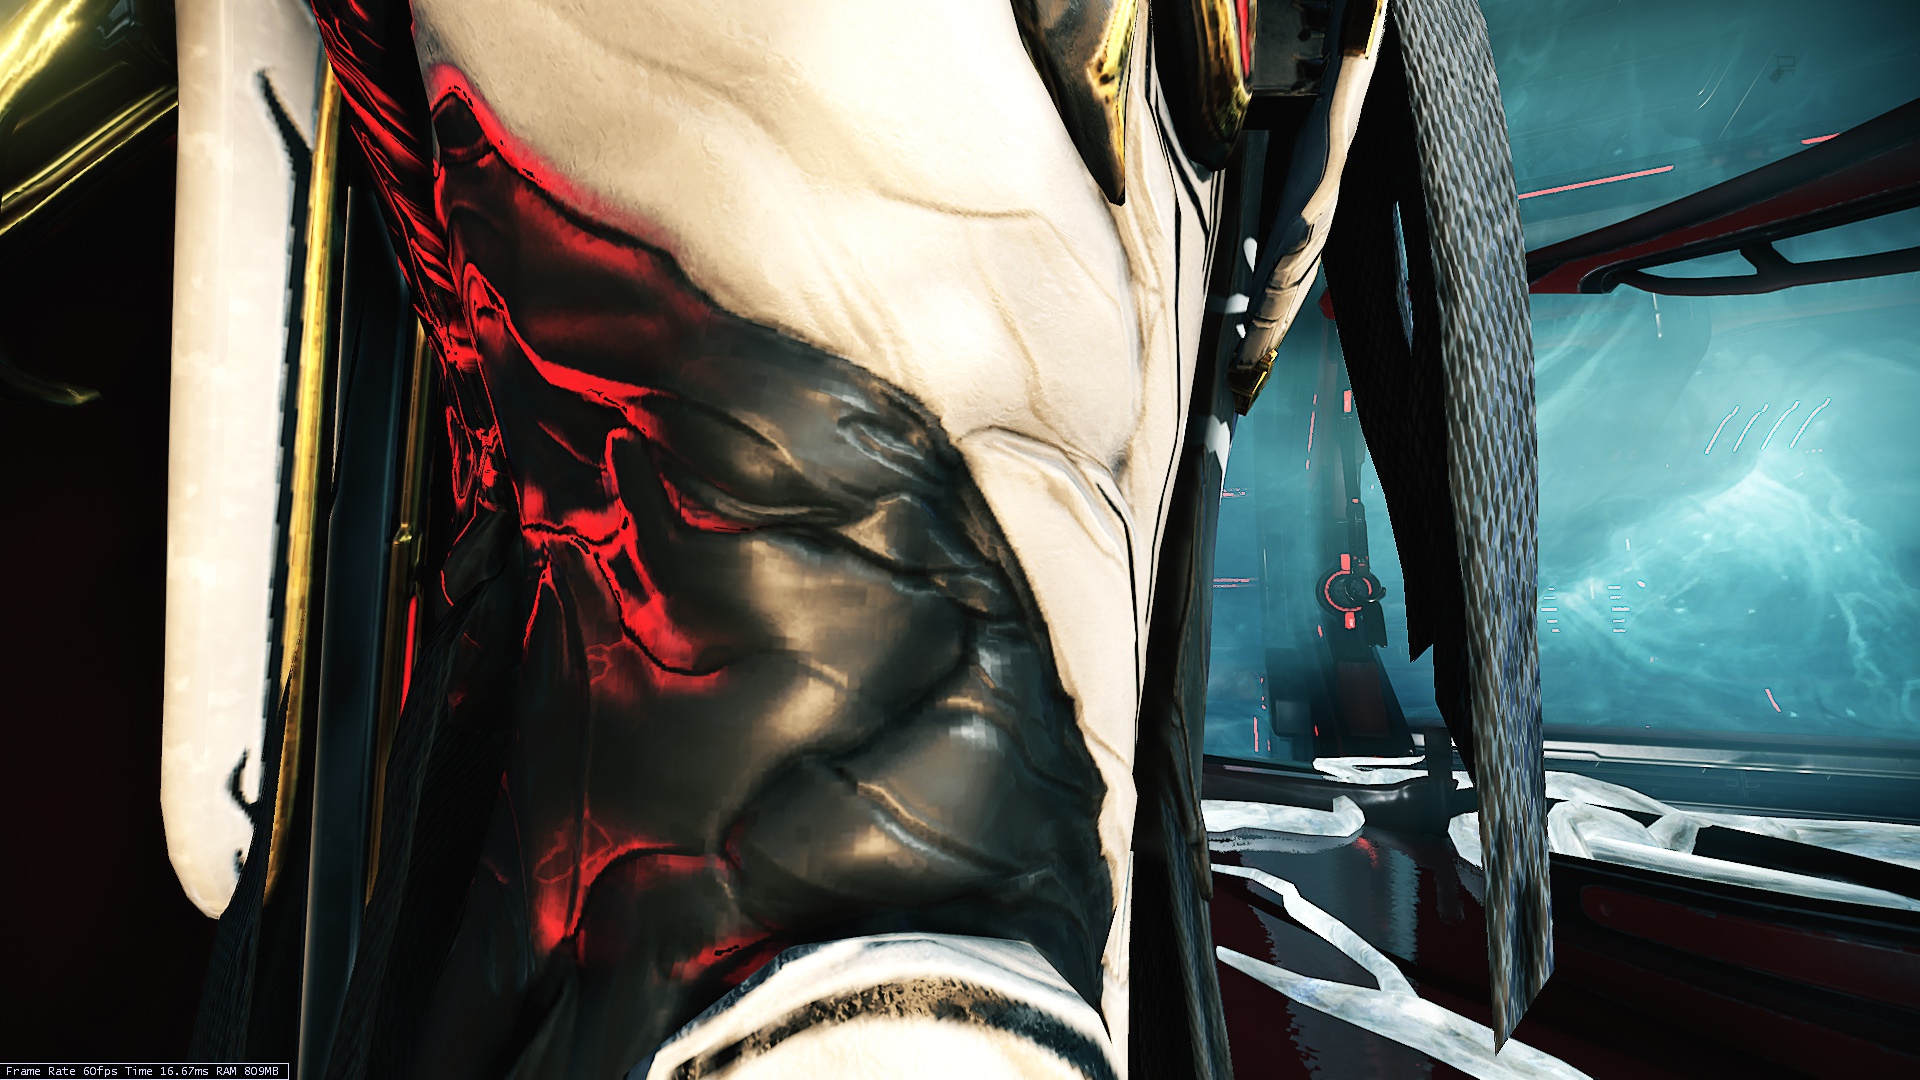 Excal Umbra inconsistent low res texture quality Problem, Animation, & UI